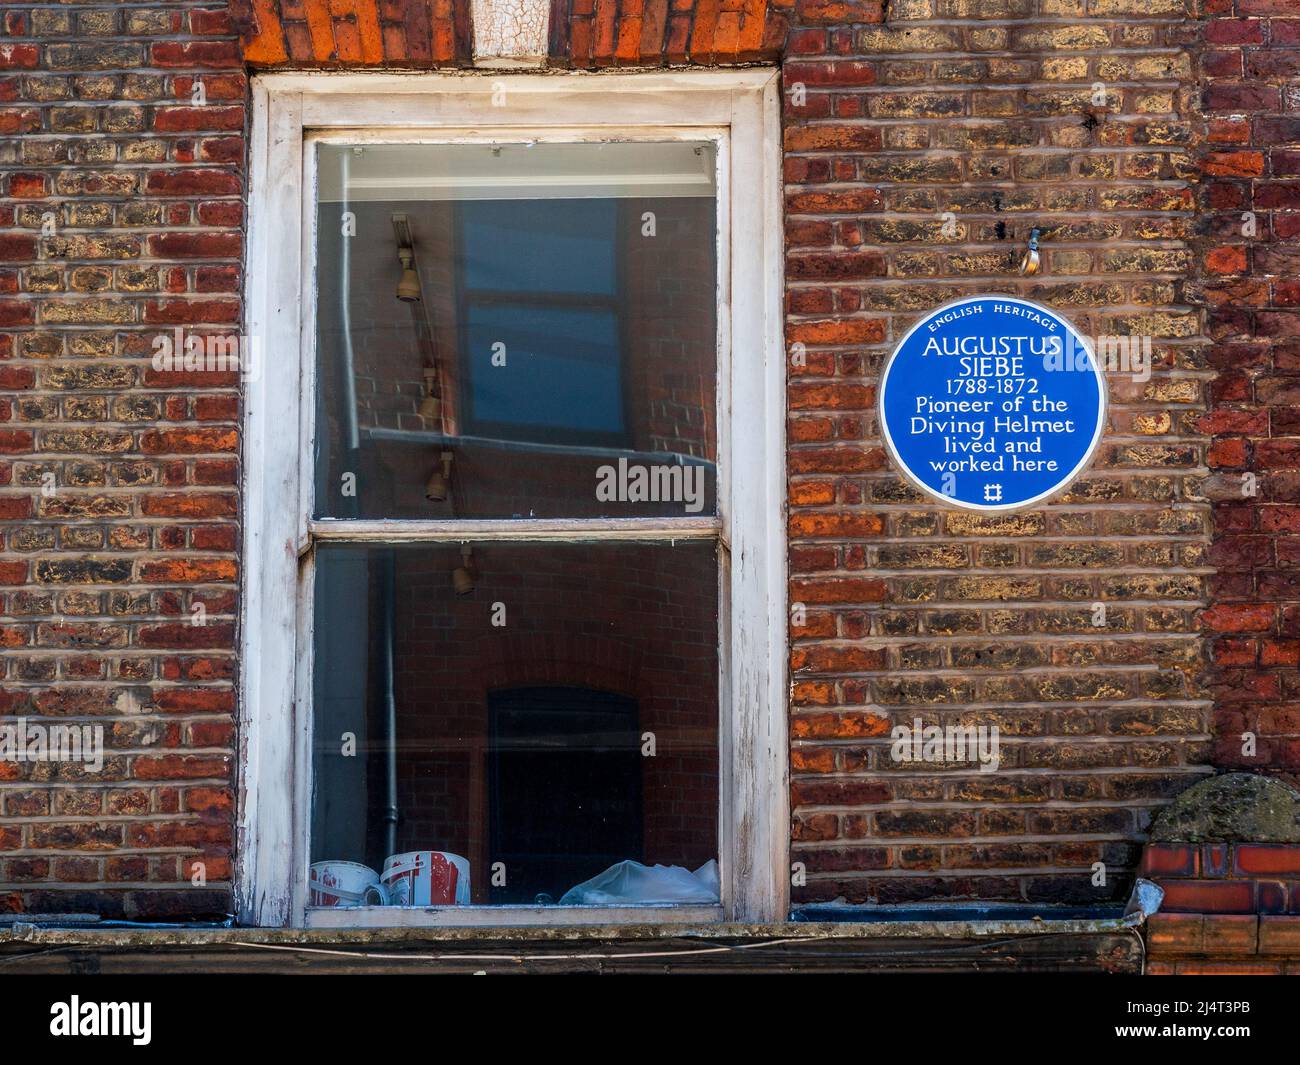 Augustus Siebe Blue Plaque 5 Denmark Street London - Inscription - AUGUSTUS SIEBE 1788-1872 Pioneer of the Diving Helmet lived and worked here Stock Photo